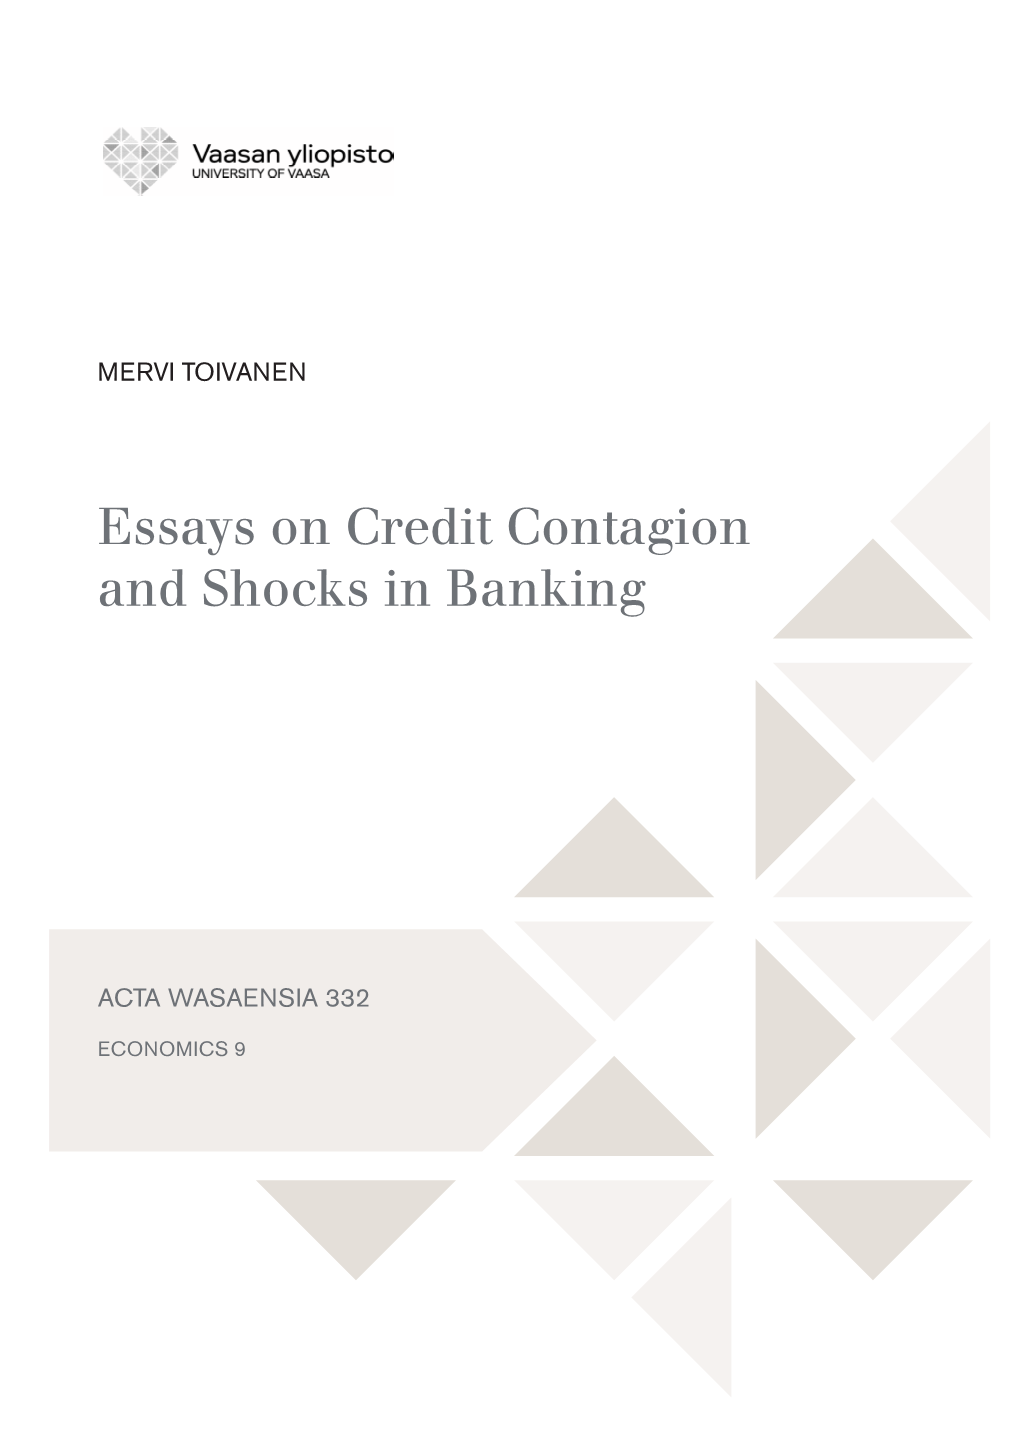 Essays on Credit Contagion and Shocks in Banking